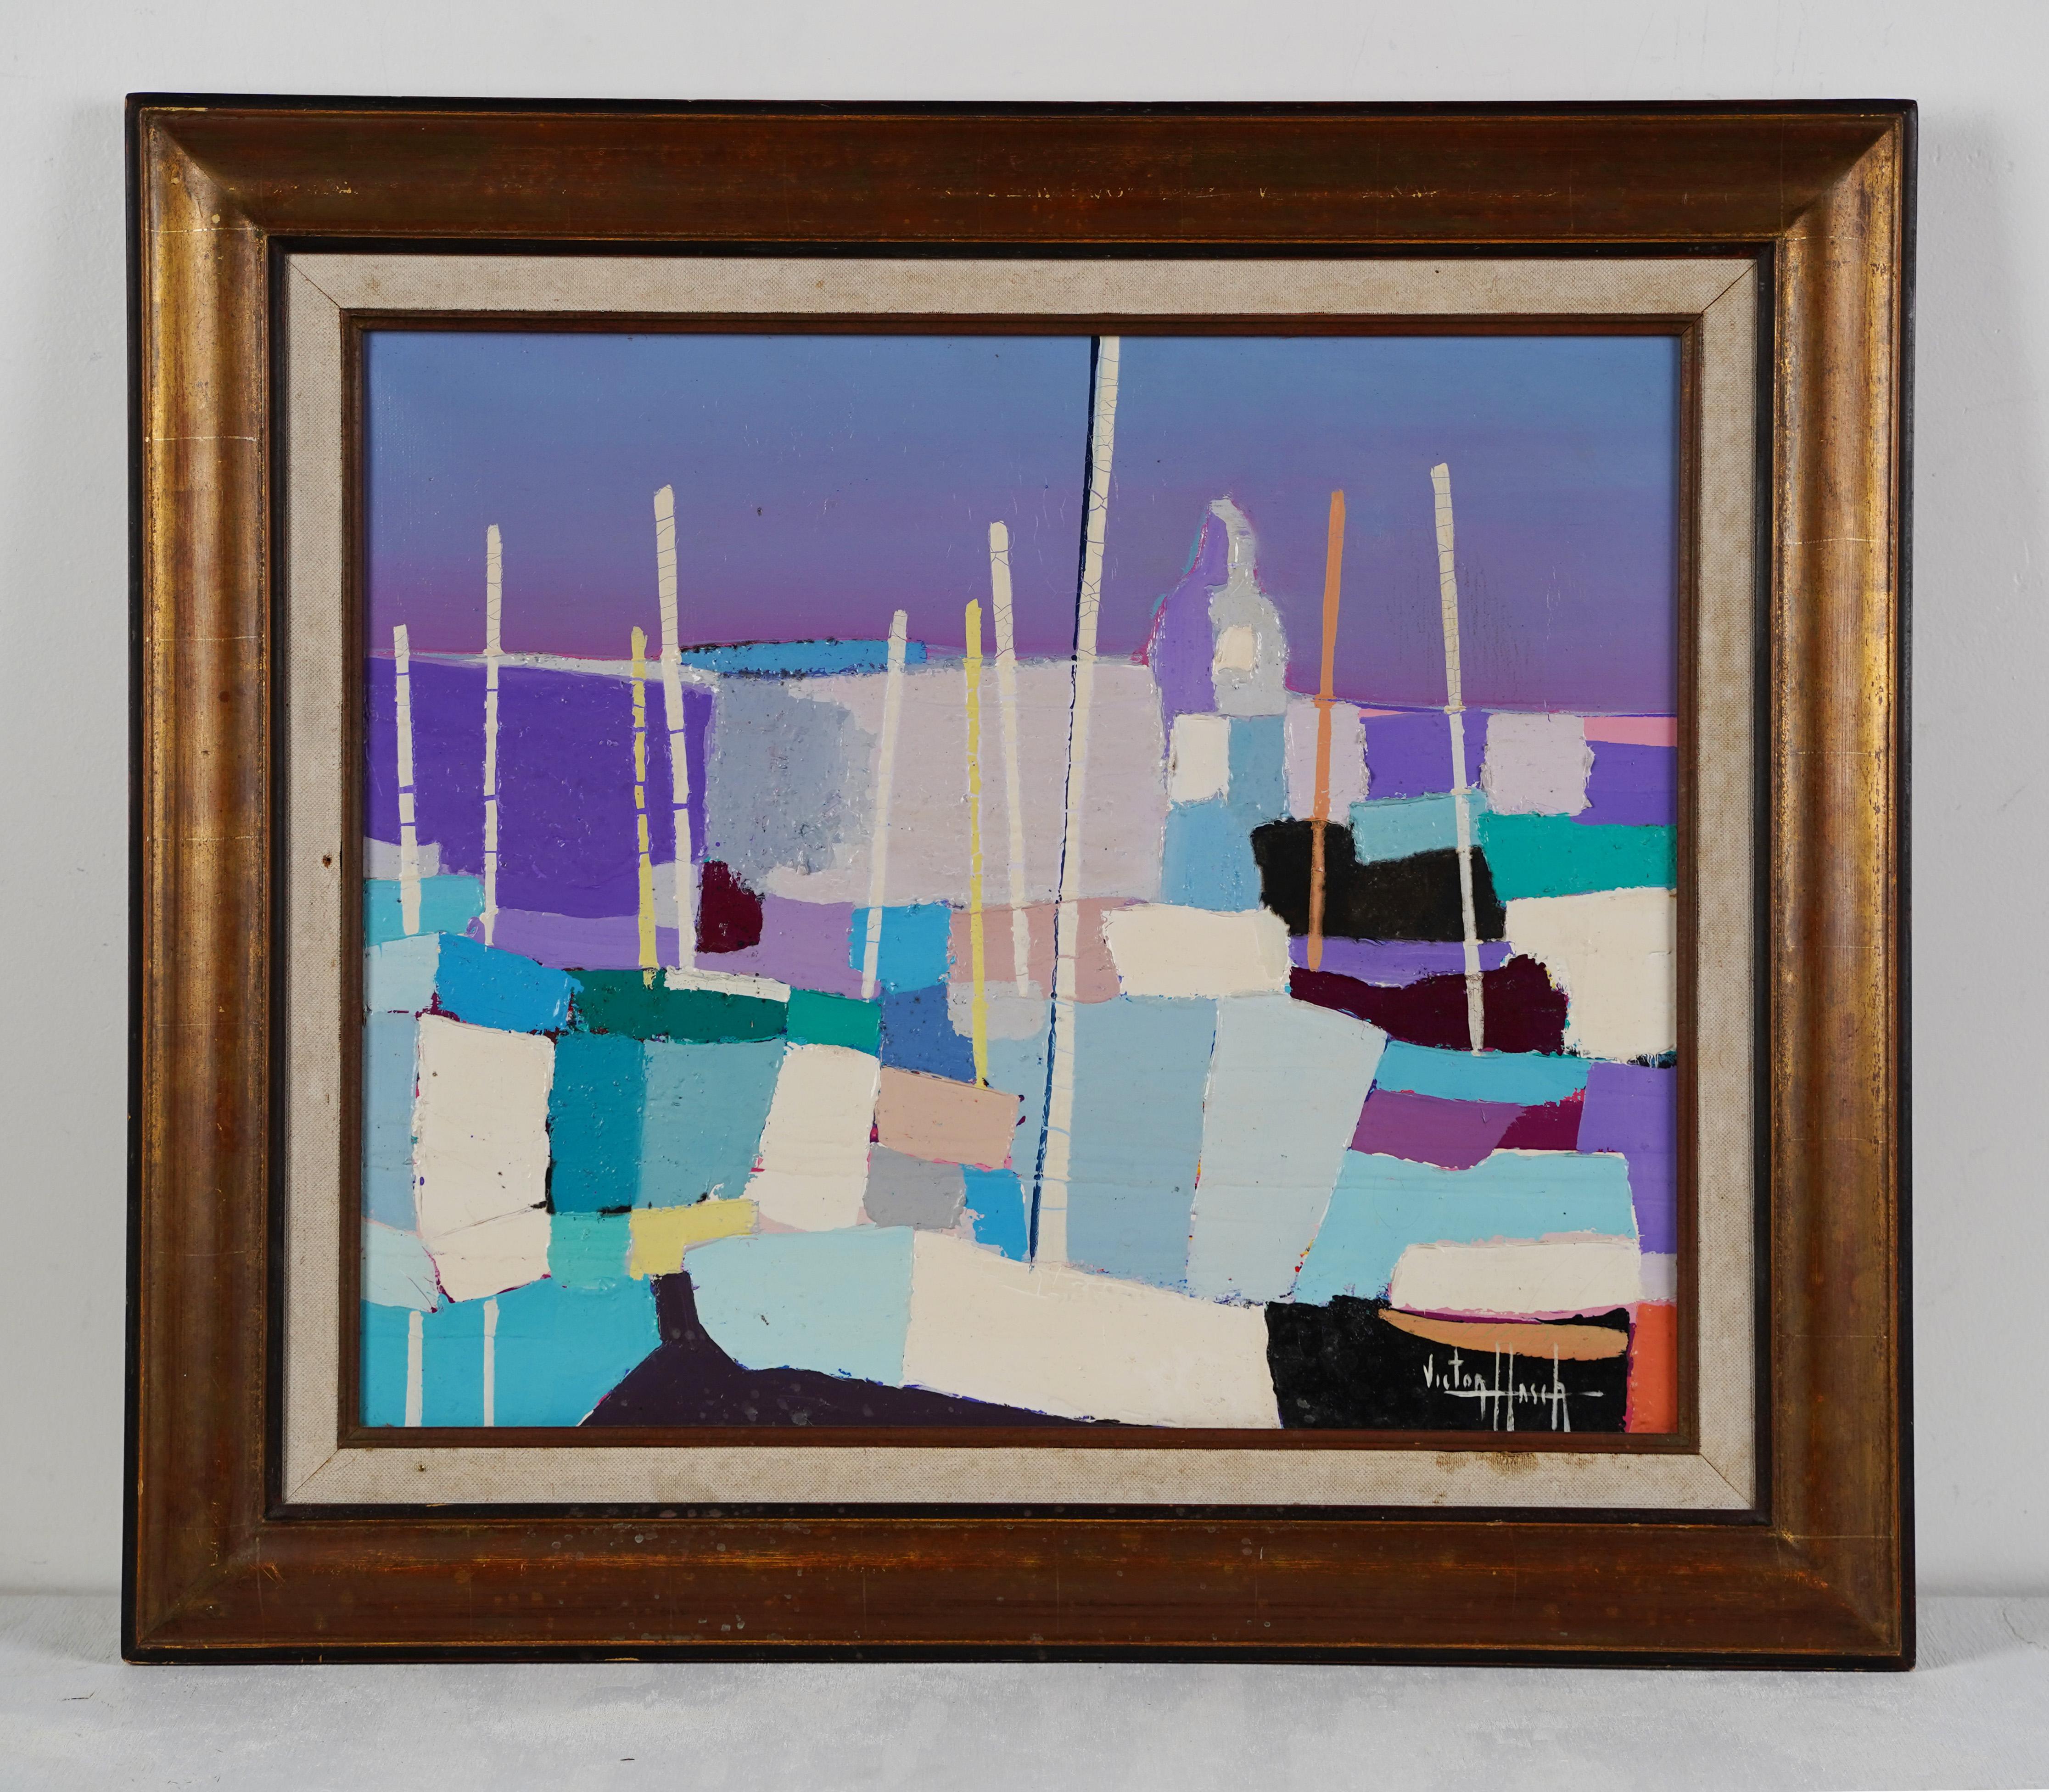 Vintage French modernist abstract seascape oil painting.  Oil on canvas, circa 1950.  Signed.  Framed.  Image size, 19H x 22L.